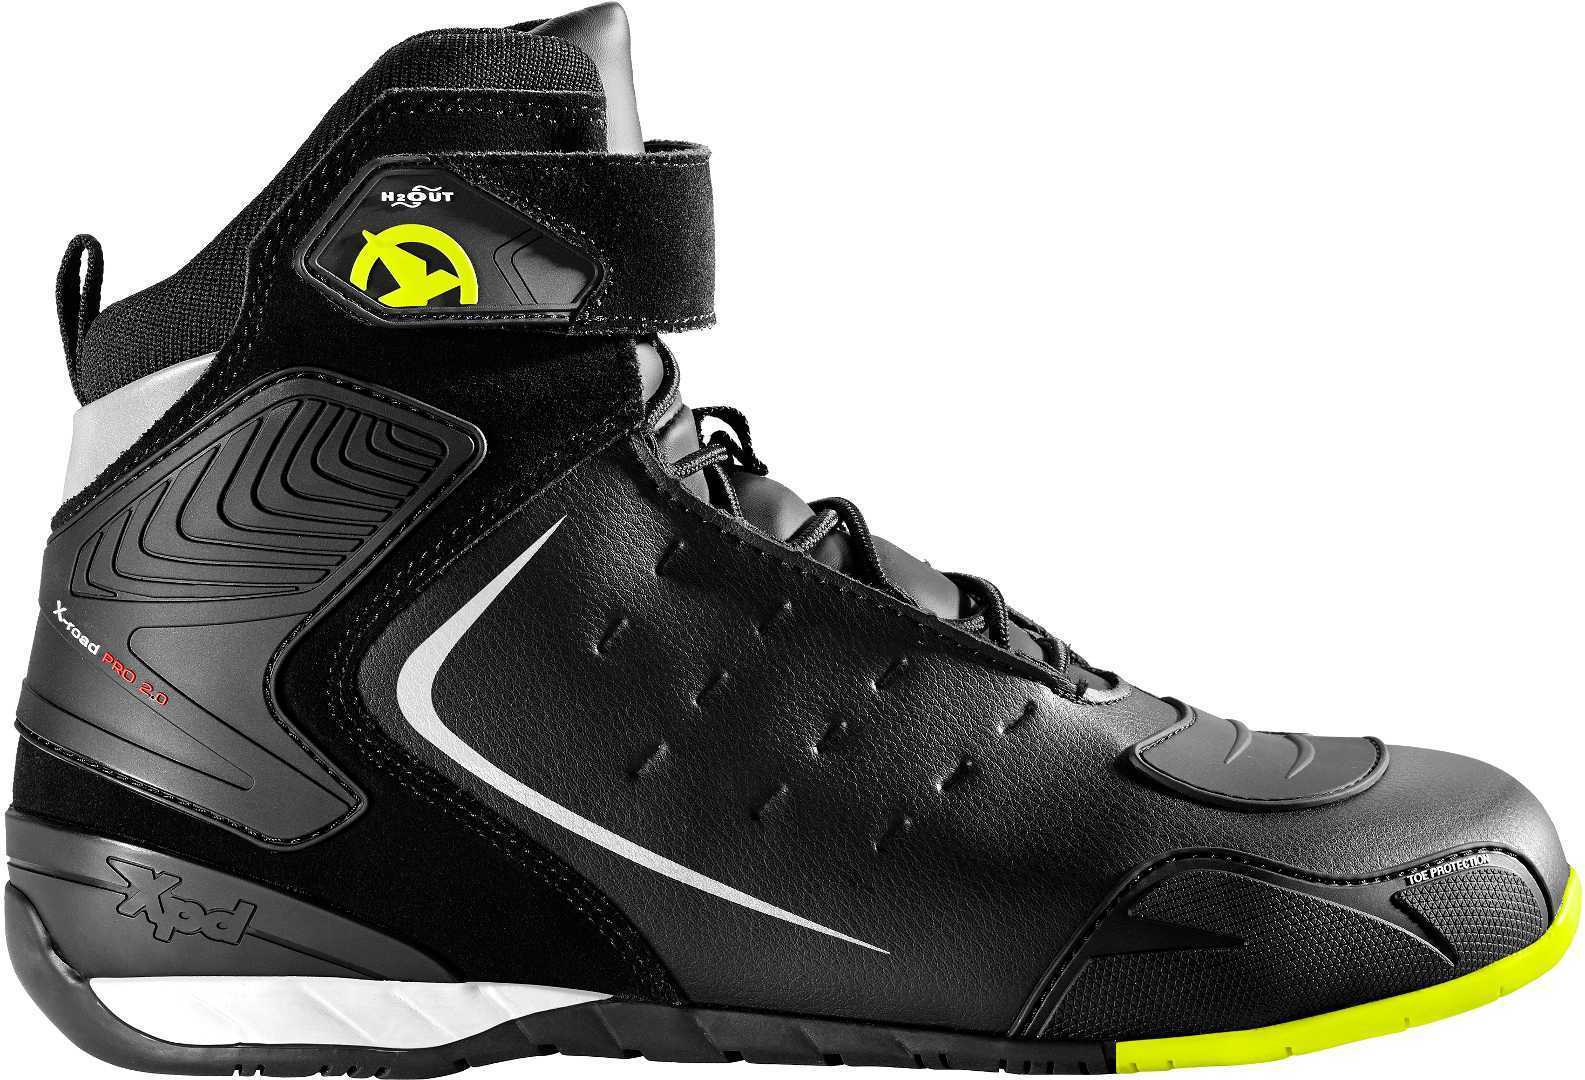 Image of XPD X-Road H2Out Yellow Fluo Talla 44